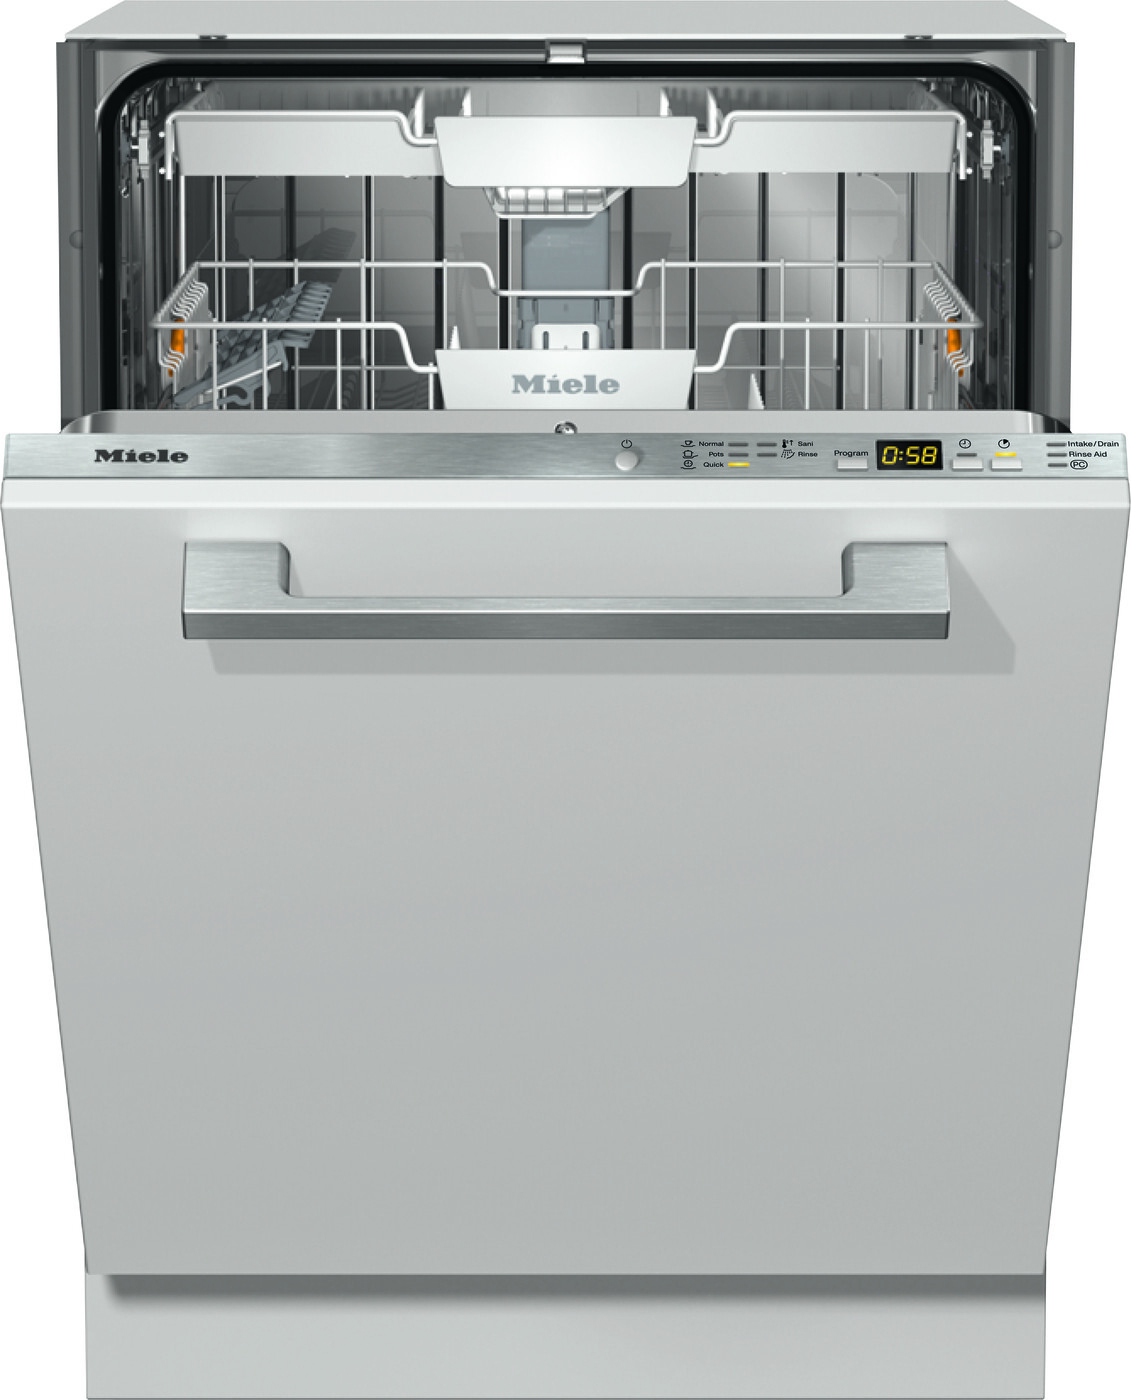 24"" Fully Integrated Built In Dishwasher - Miele G5056SCVI